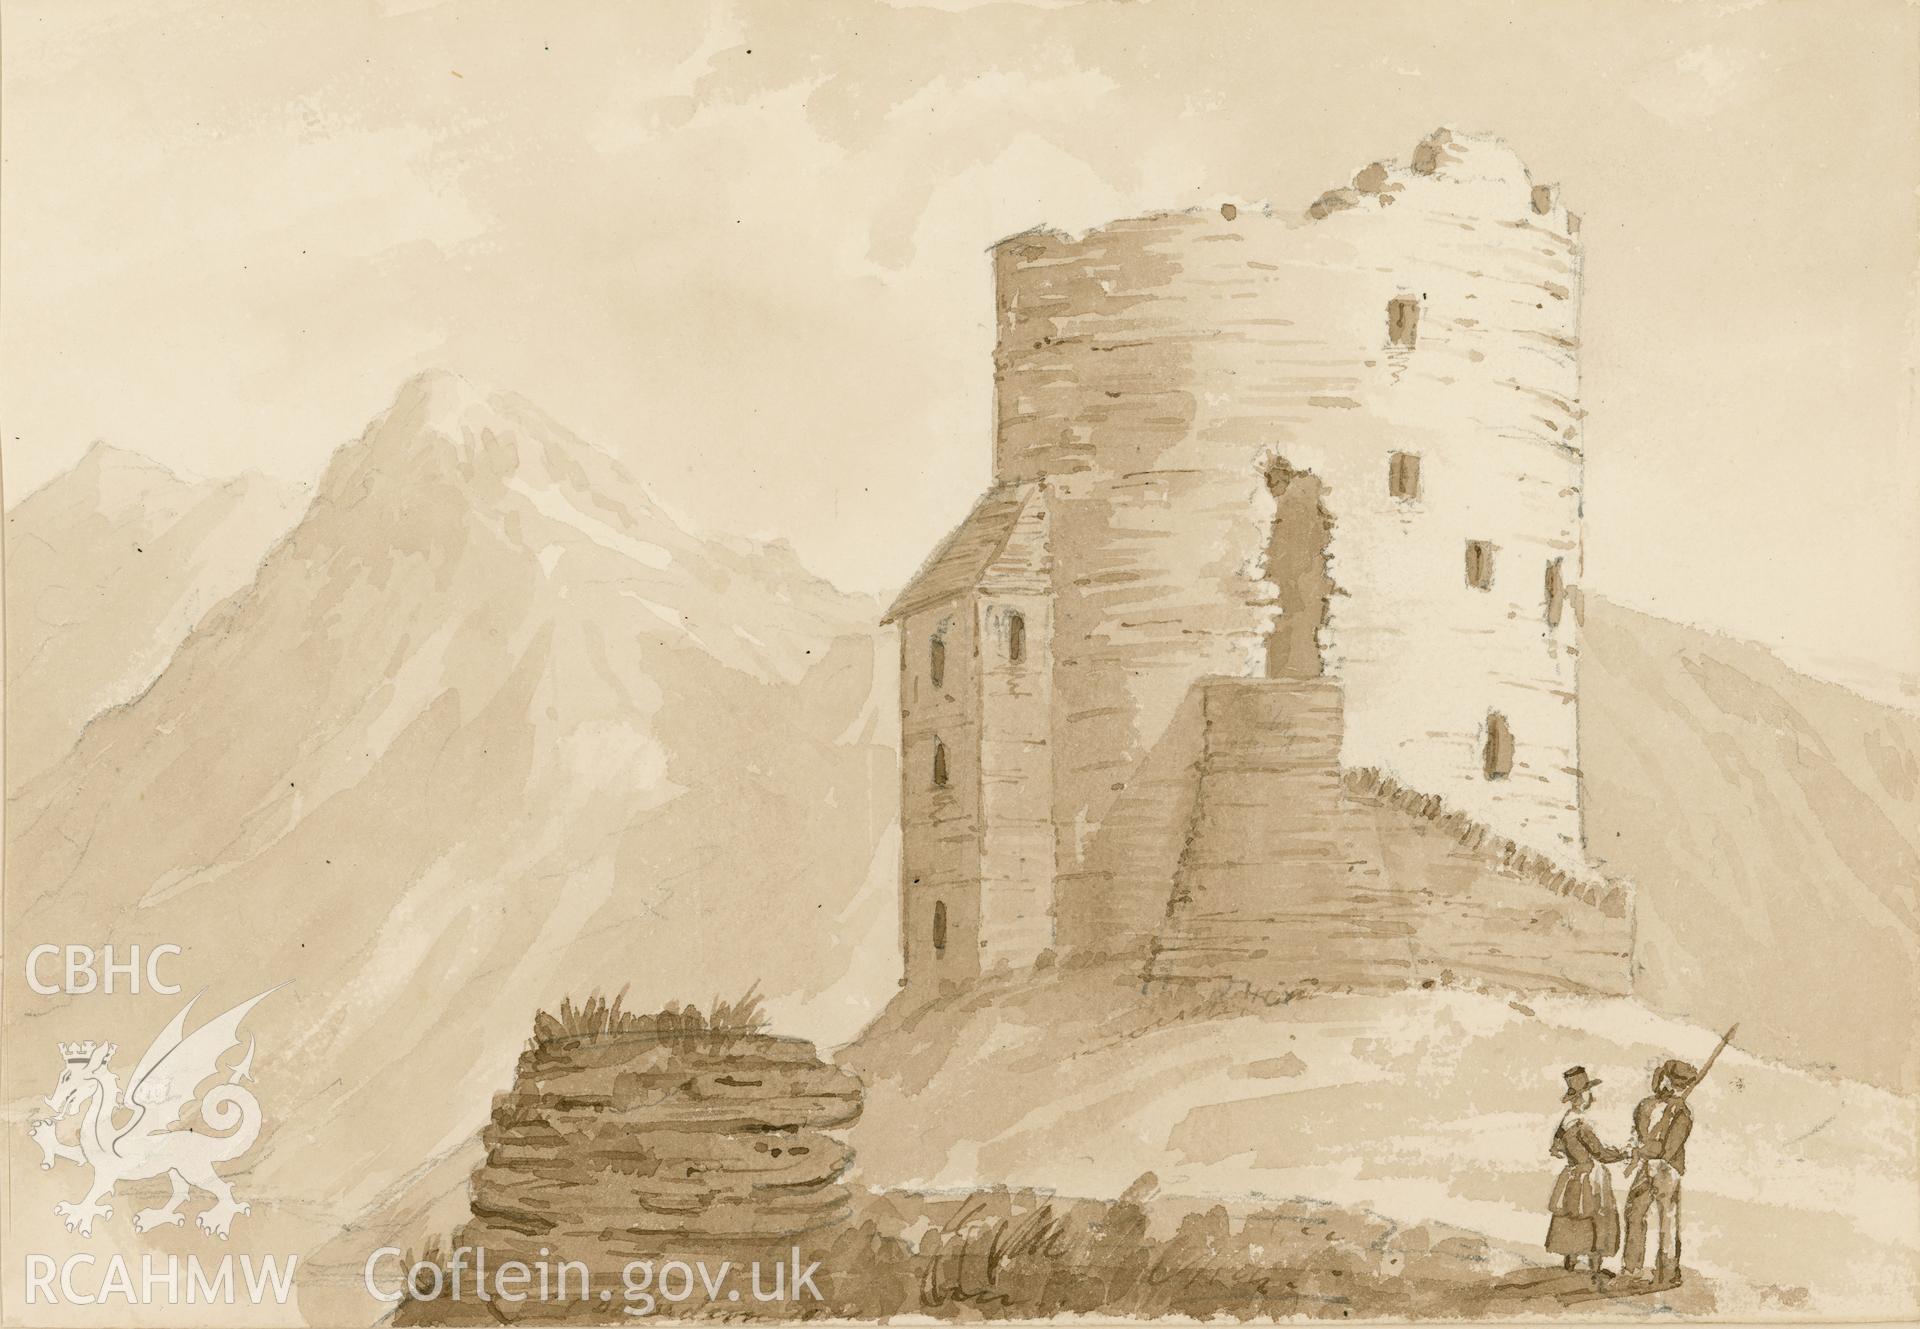 Digital copy of a sepia wash painting of Dolbadarn Castle, produced by Colonel William Markham, c1840.